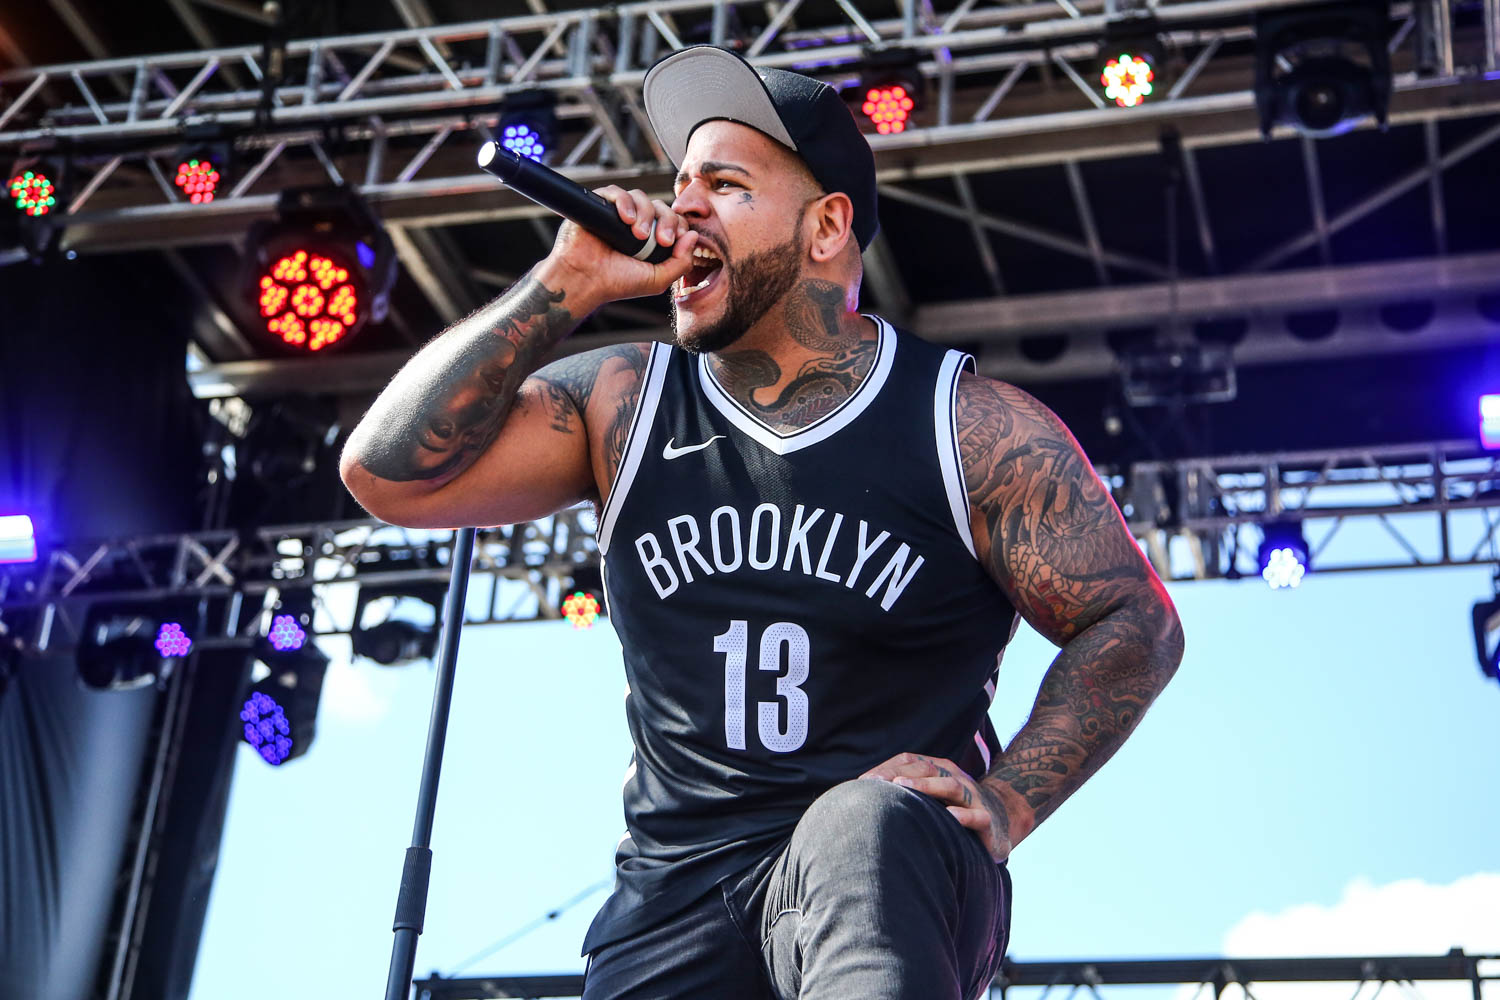 Tommy Vext, lead vocalist of Bad Wolves. 